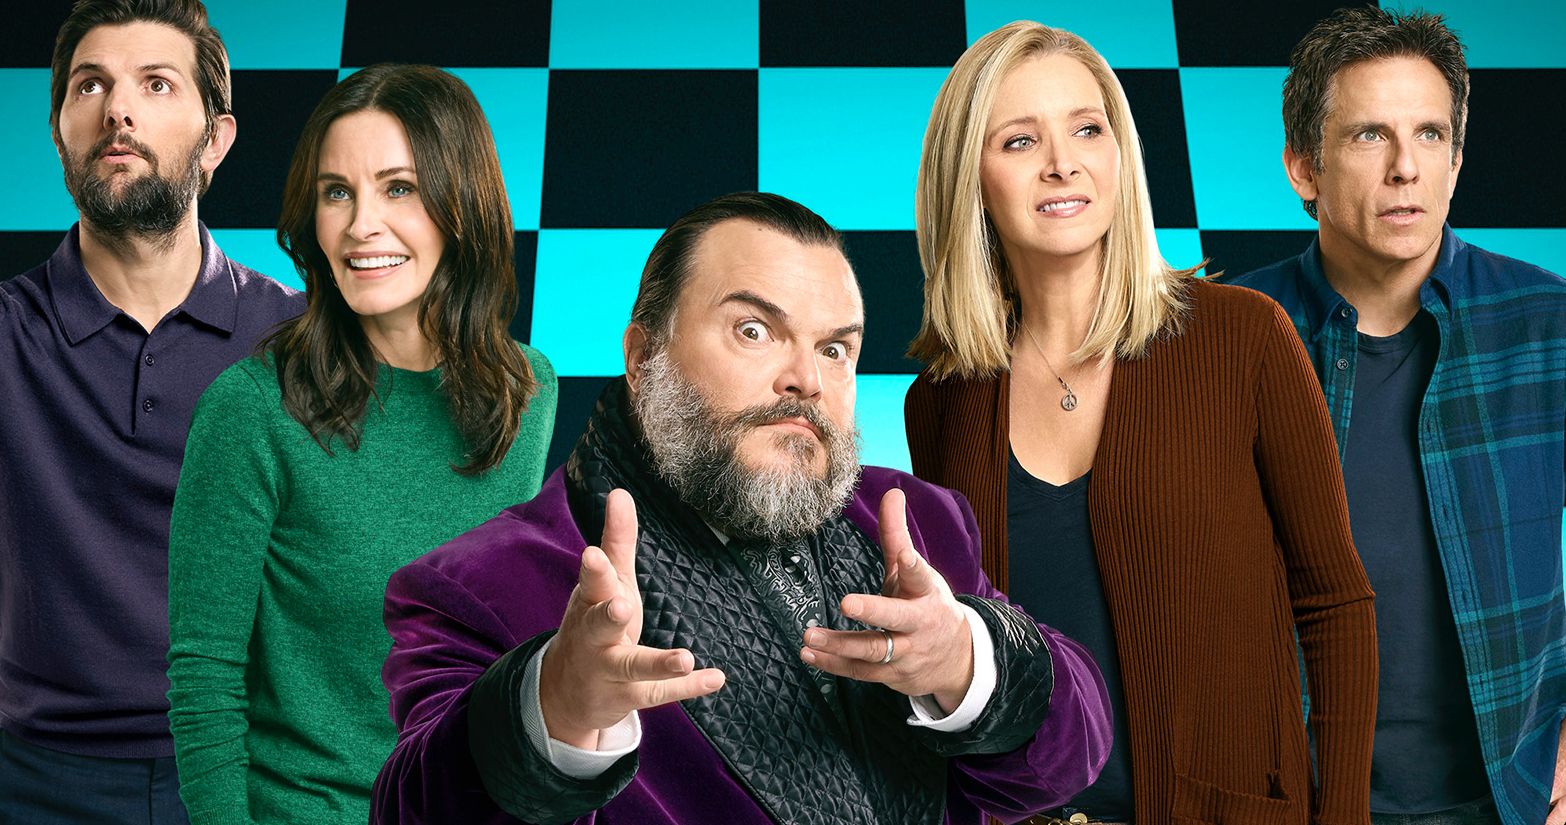 Watch as Jack Black Traps Ben Stiller and Friends in the Celebrity Escape Room